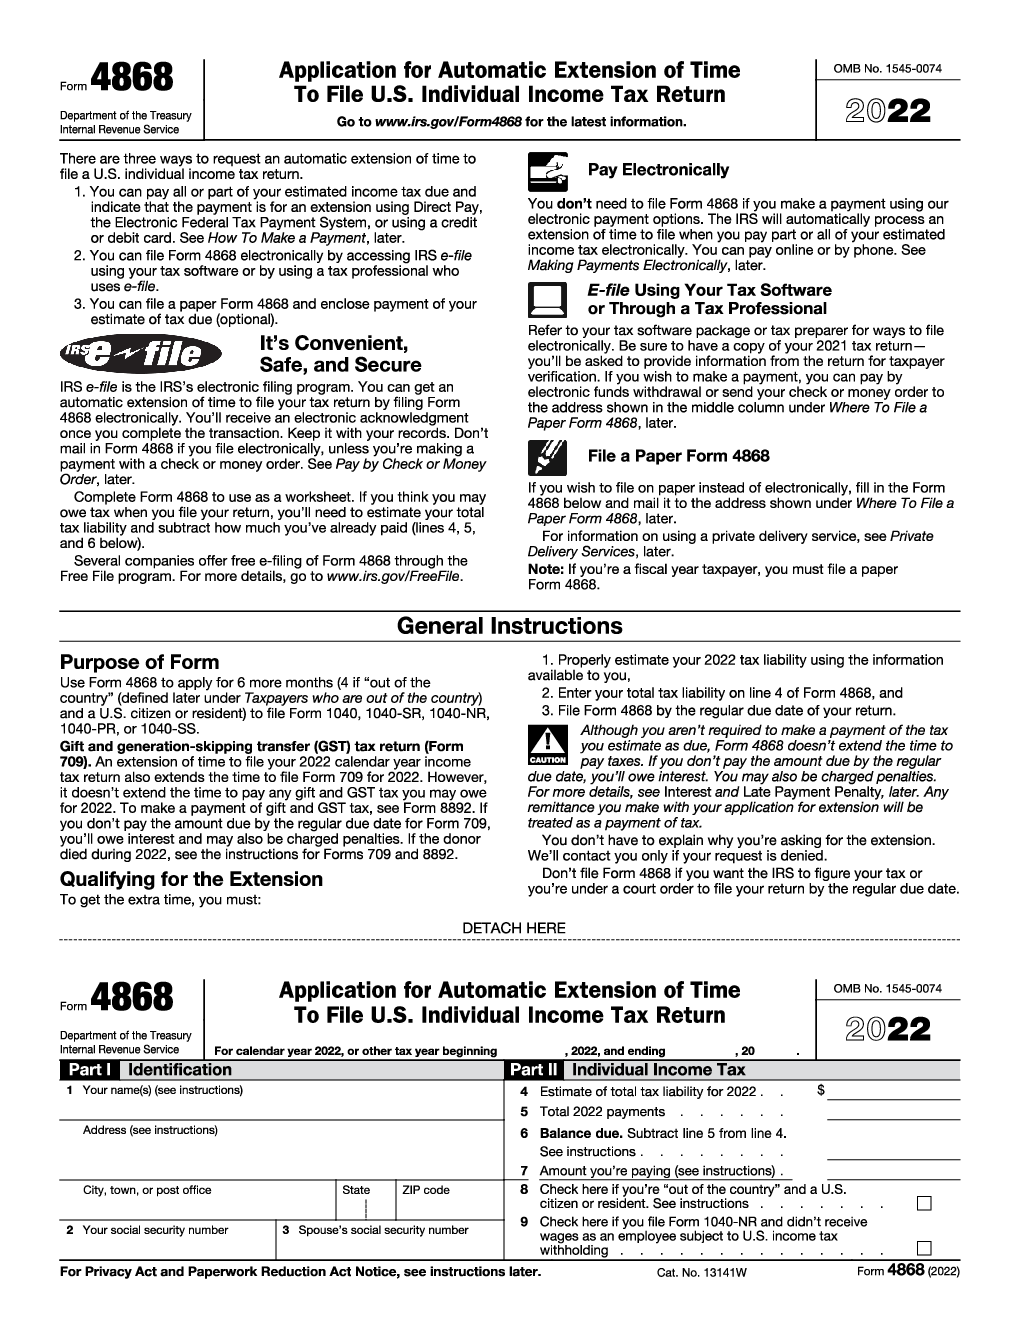 IRS Form 4868. Application for Automatic Extension of Time To File U.S